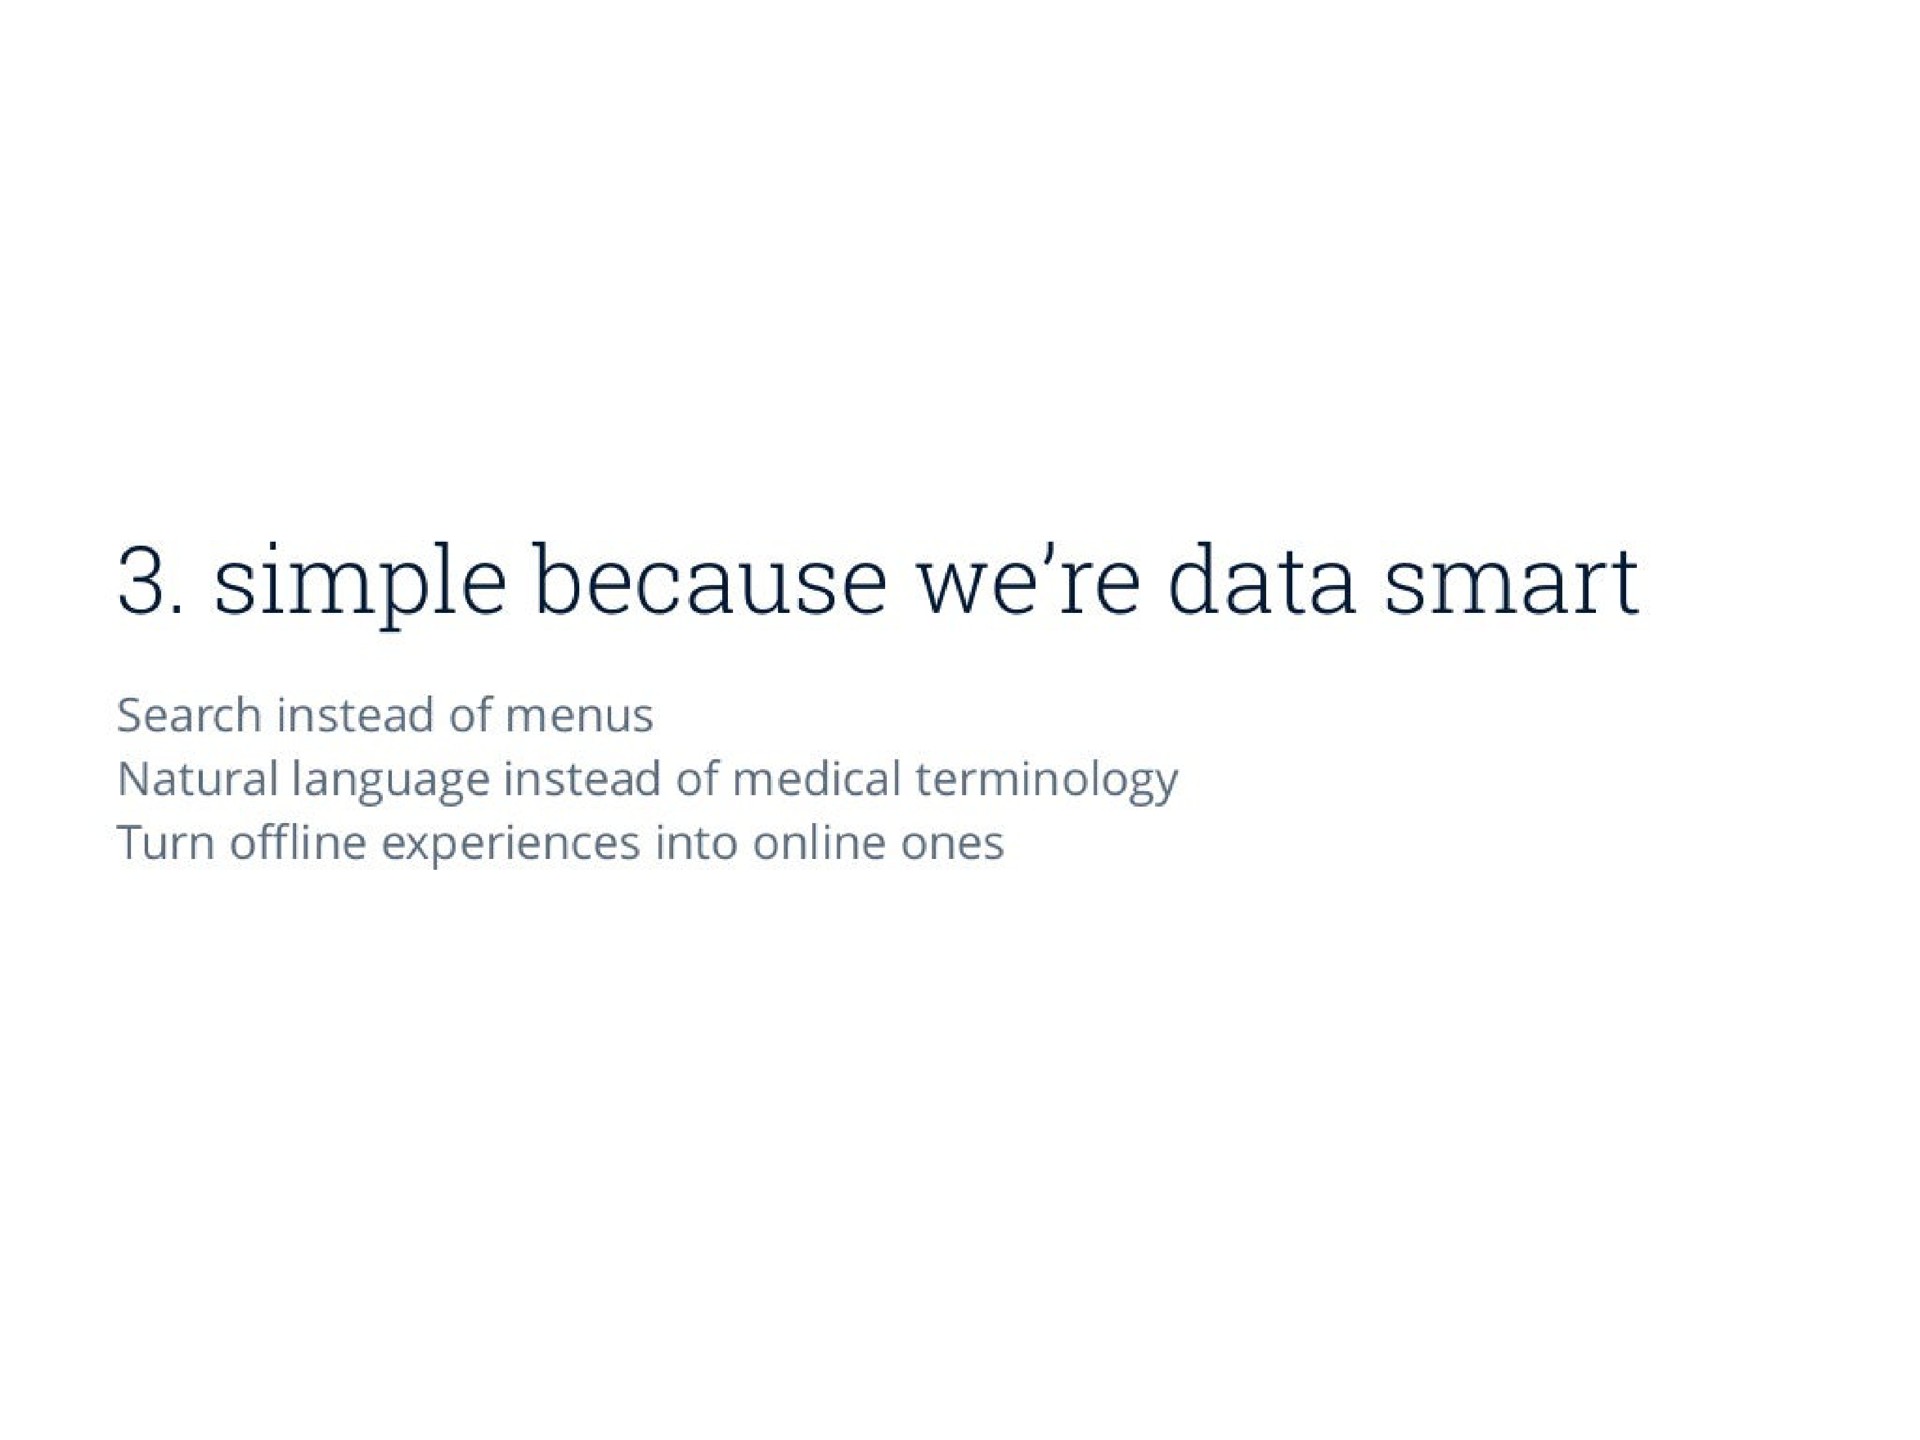 simple because were data smart search instead of menus natural language instead of medical terminology turn experiences into ones | Oscar Health